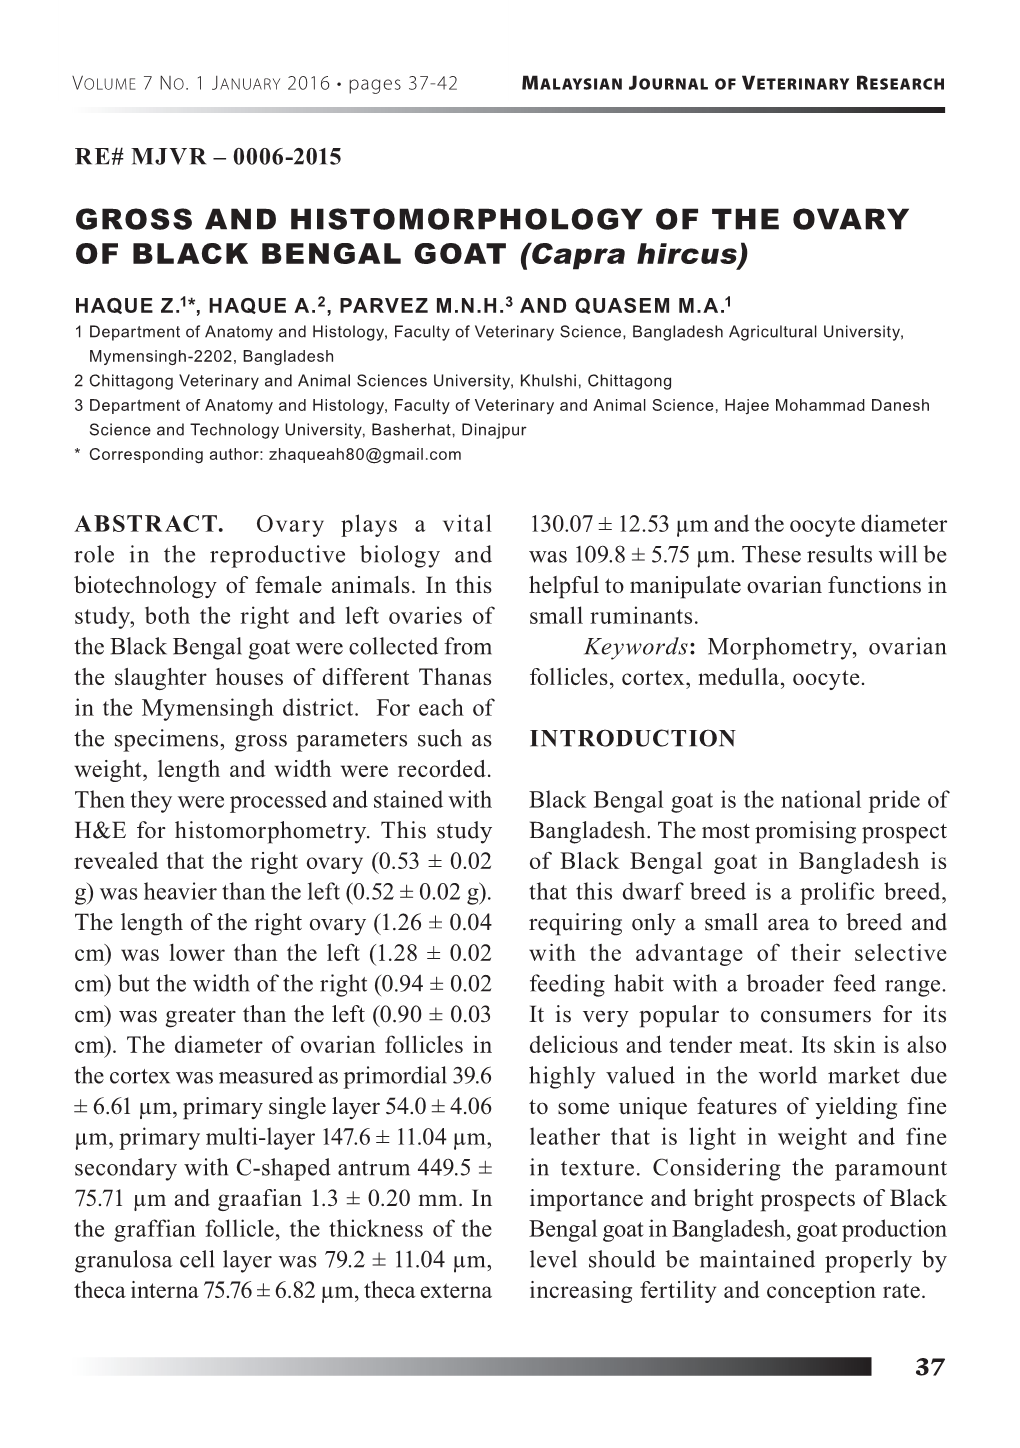 GROSS and HISTOMORPHOLOGY of the OVARY of BLACK BENGAL GOAT (Capra Hircus)